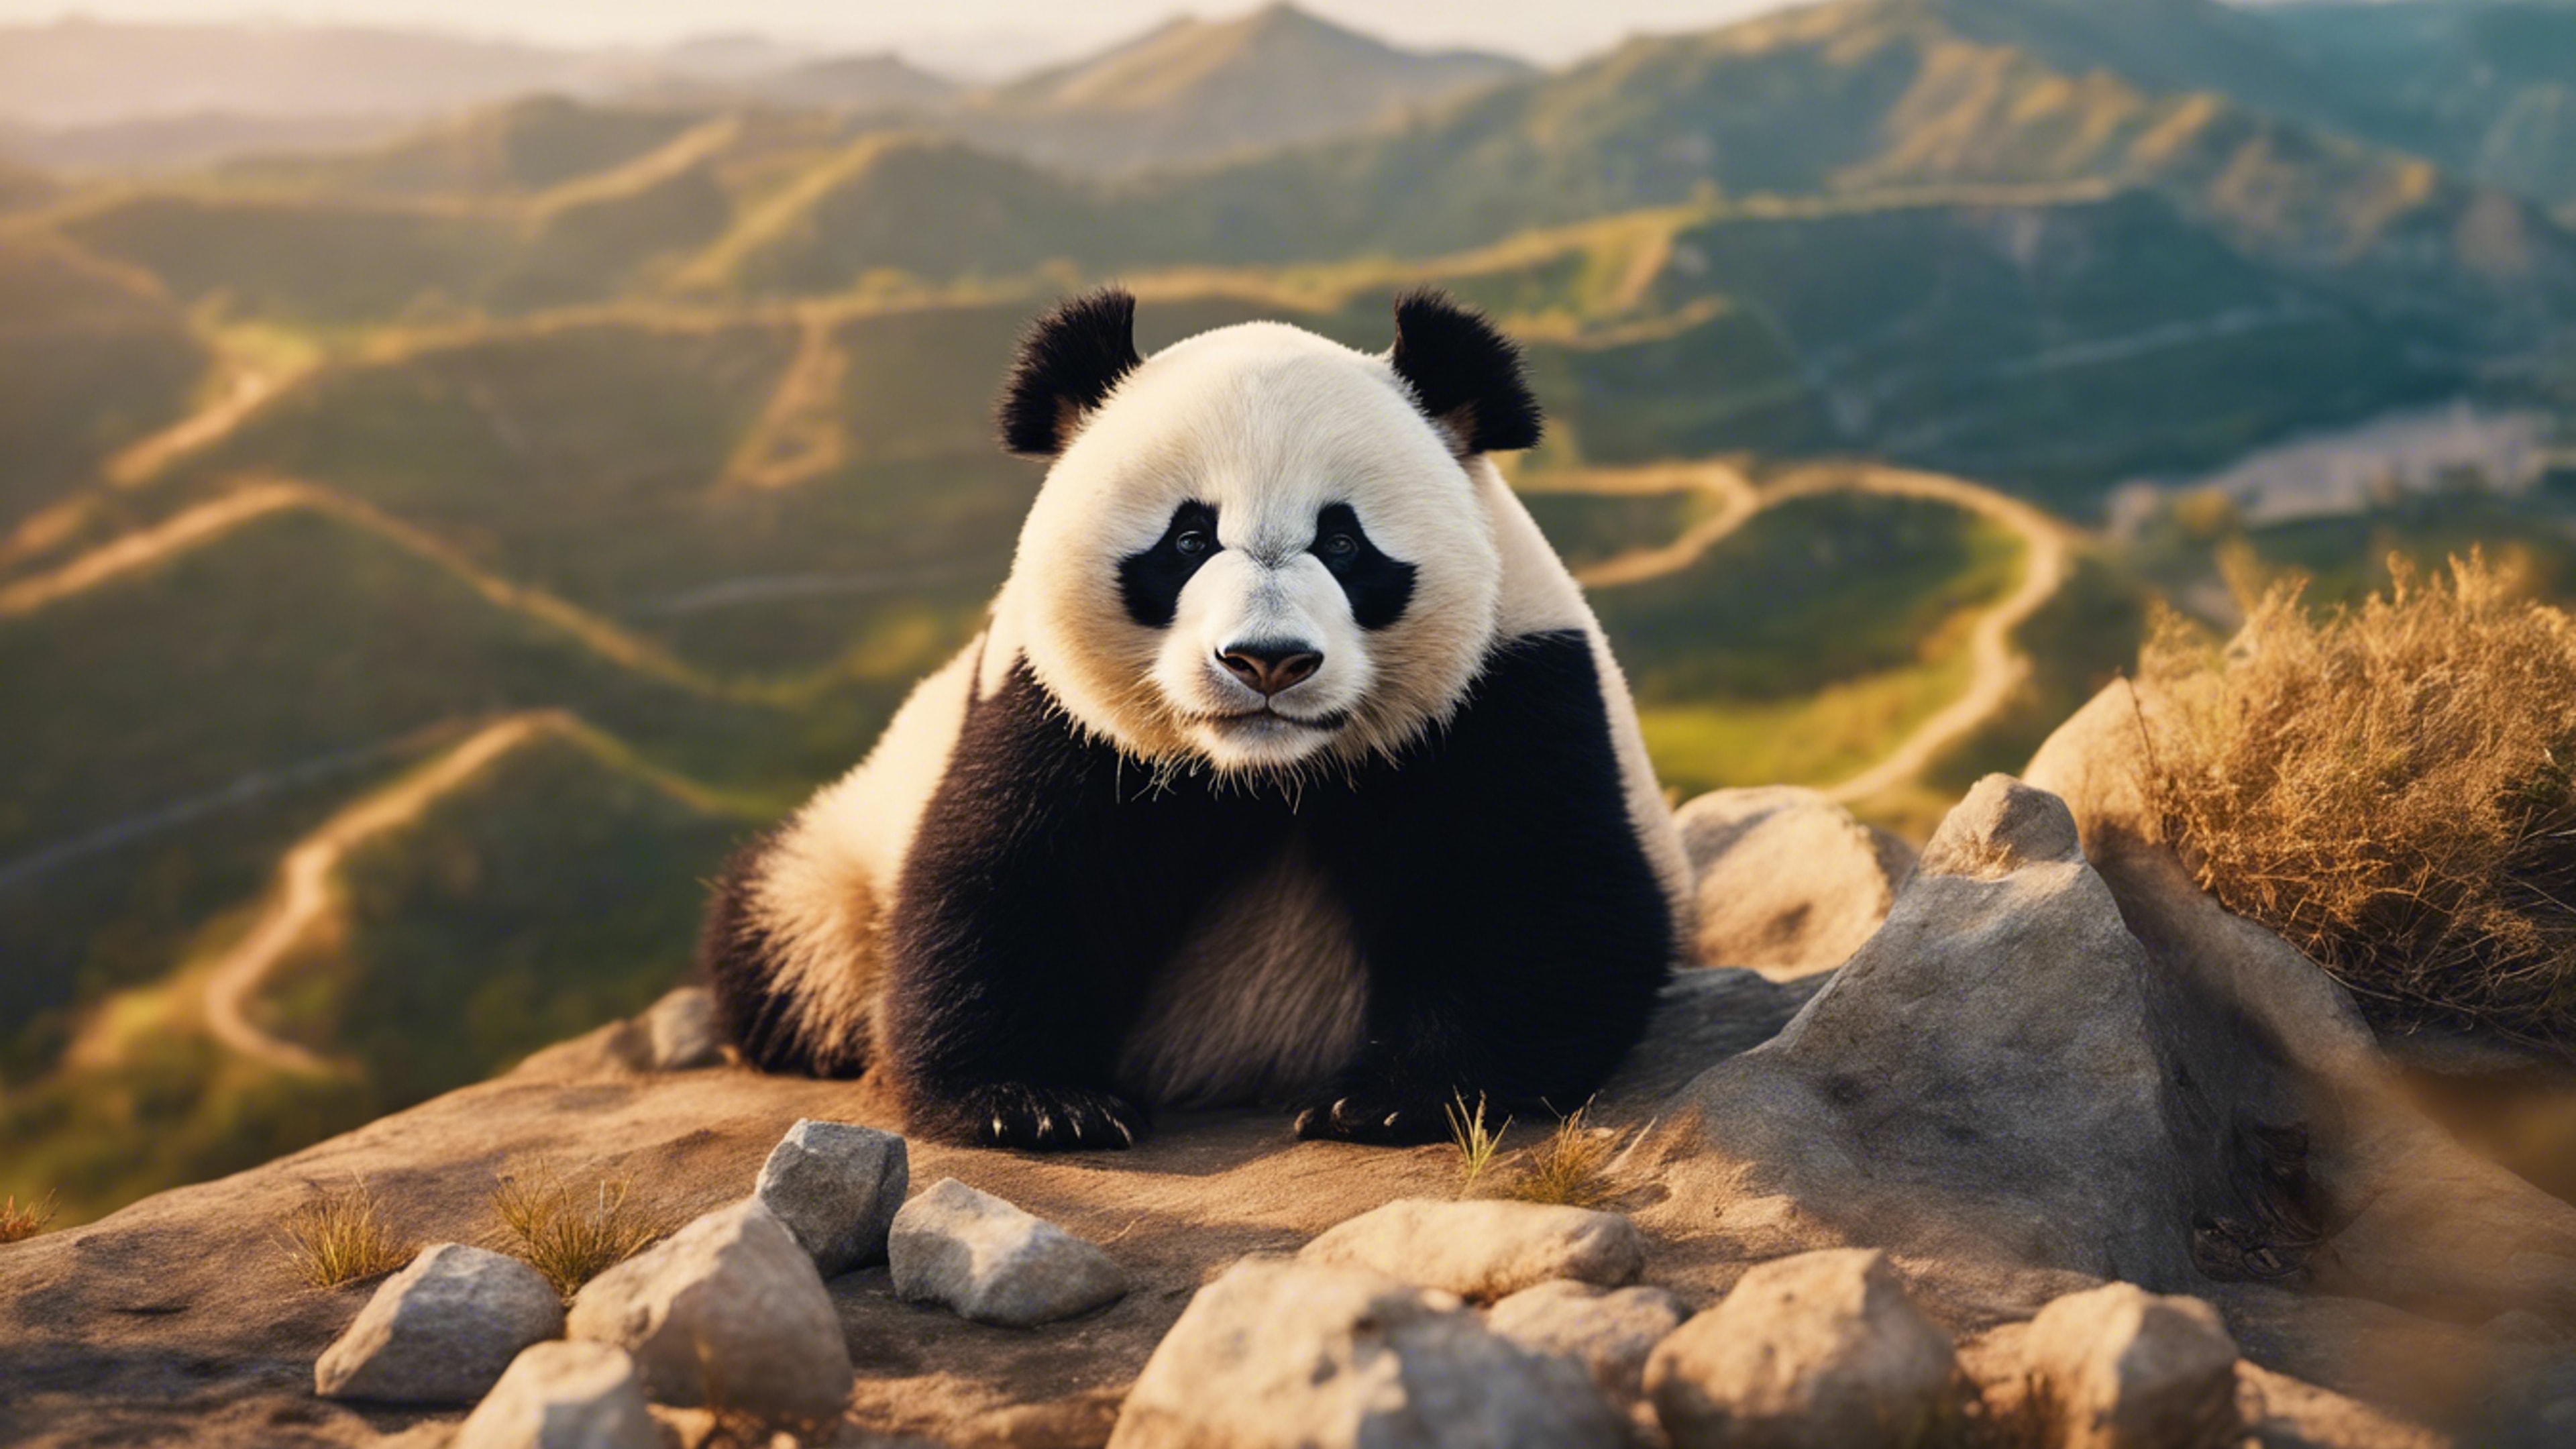 A proud panda basking in the warm sunlight, on a cliff overlooking a wide, beautiful valley. Ταπετσαρία[f1b4c4cbced14ad39a34]